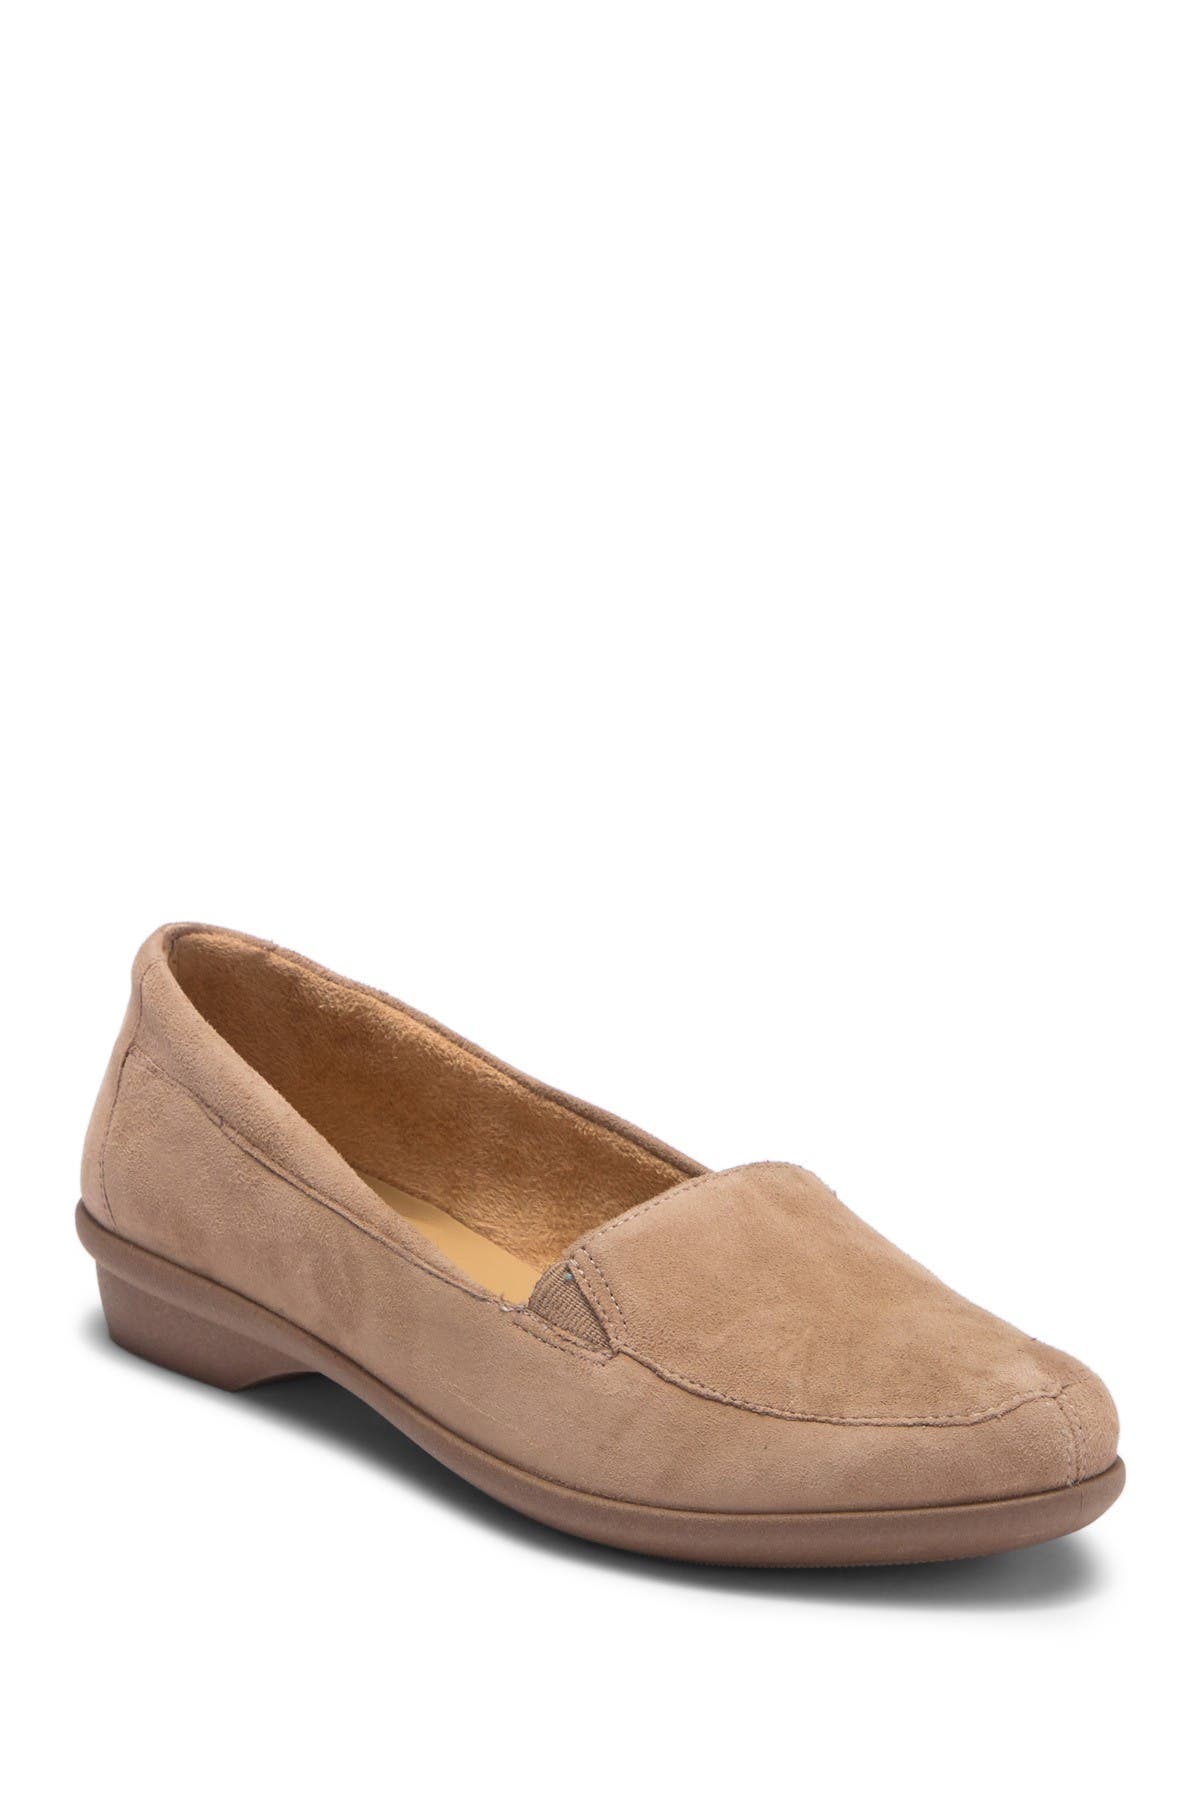 Naturalizer | Panache Suede Loafer 